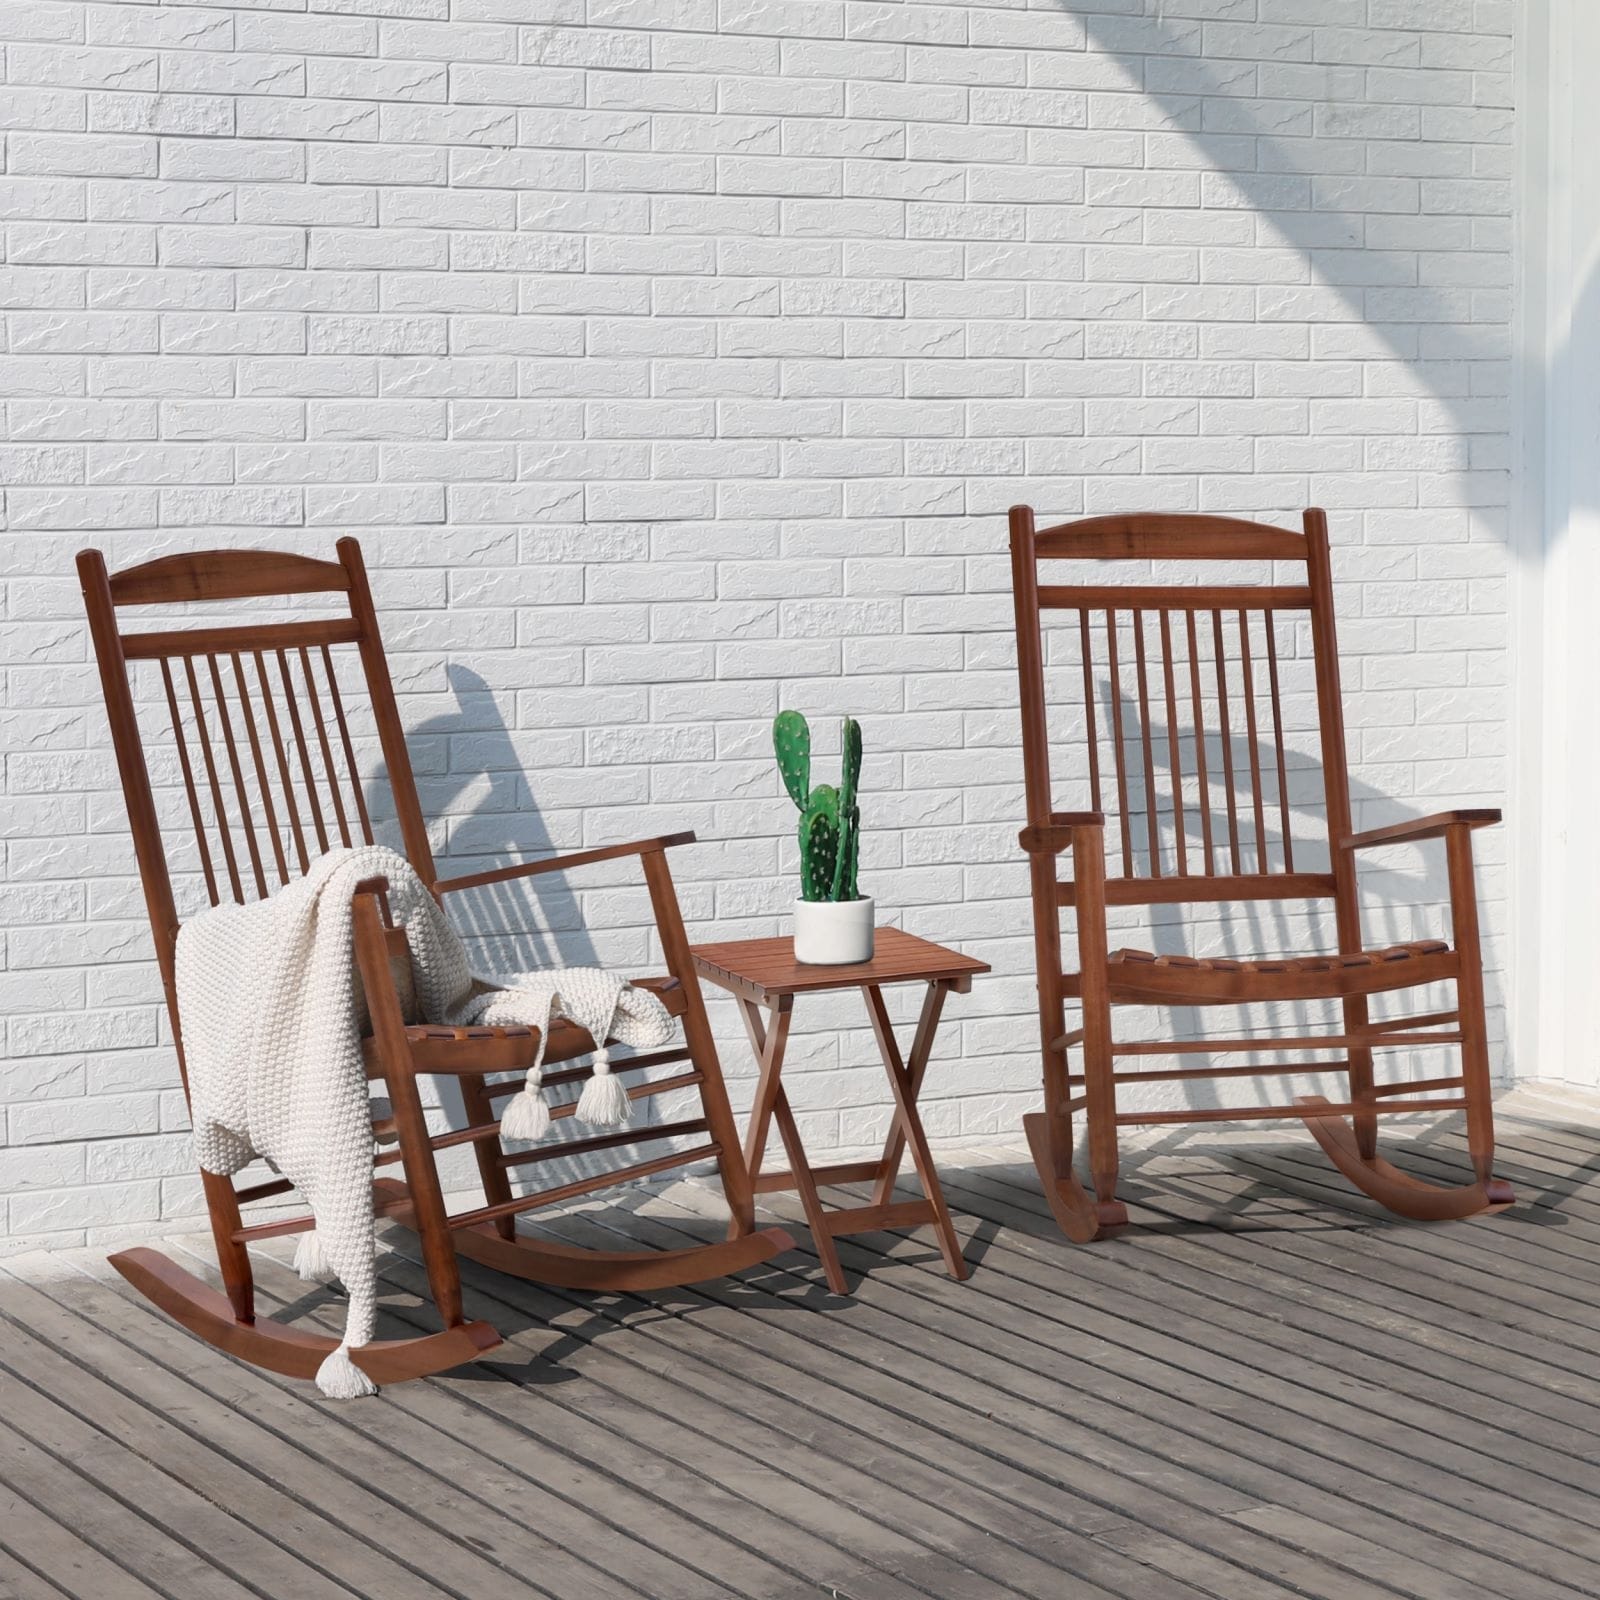 Veikous Wood 3-piece Outdoor Rocking Chair And Folding Table Set